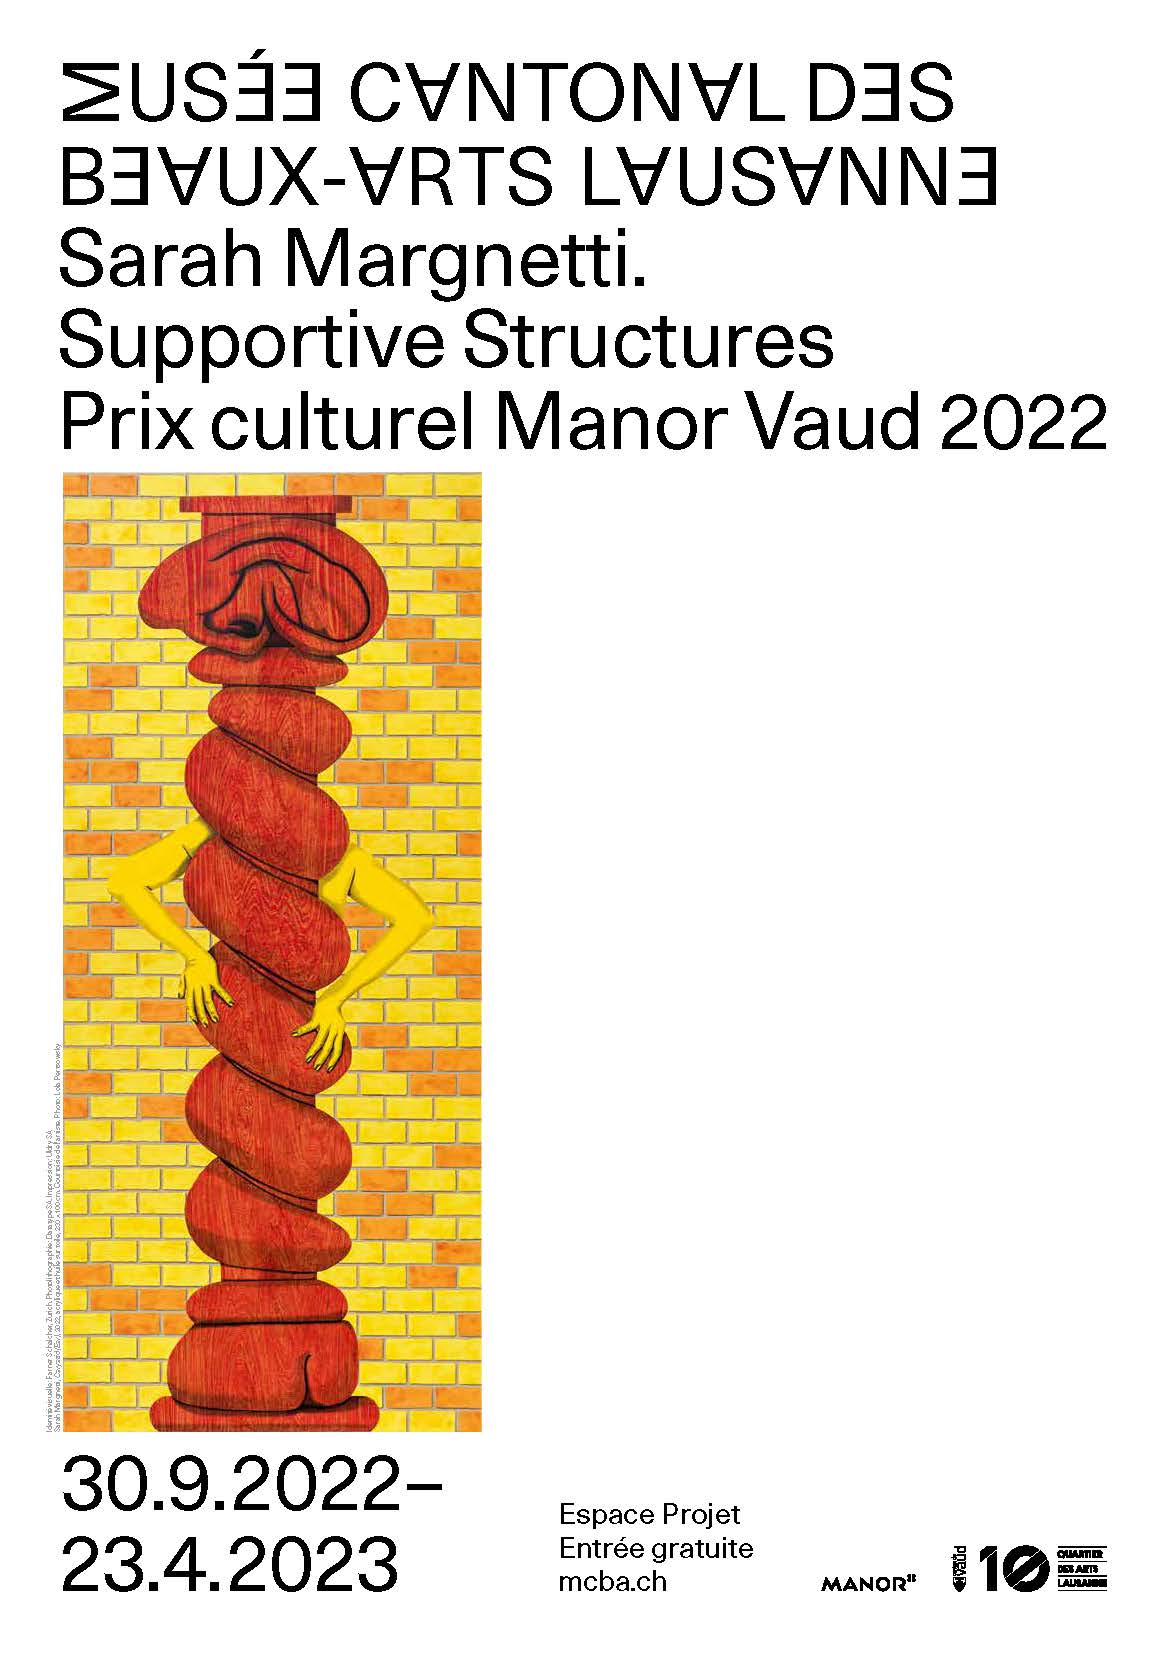 Sarah Margnetti. Supportive Structures. Manor Vaud Culture Prize 2022